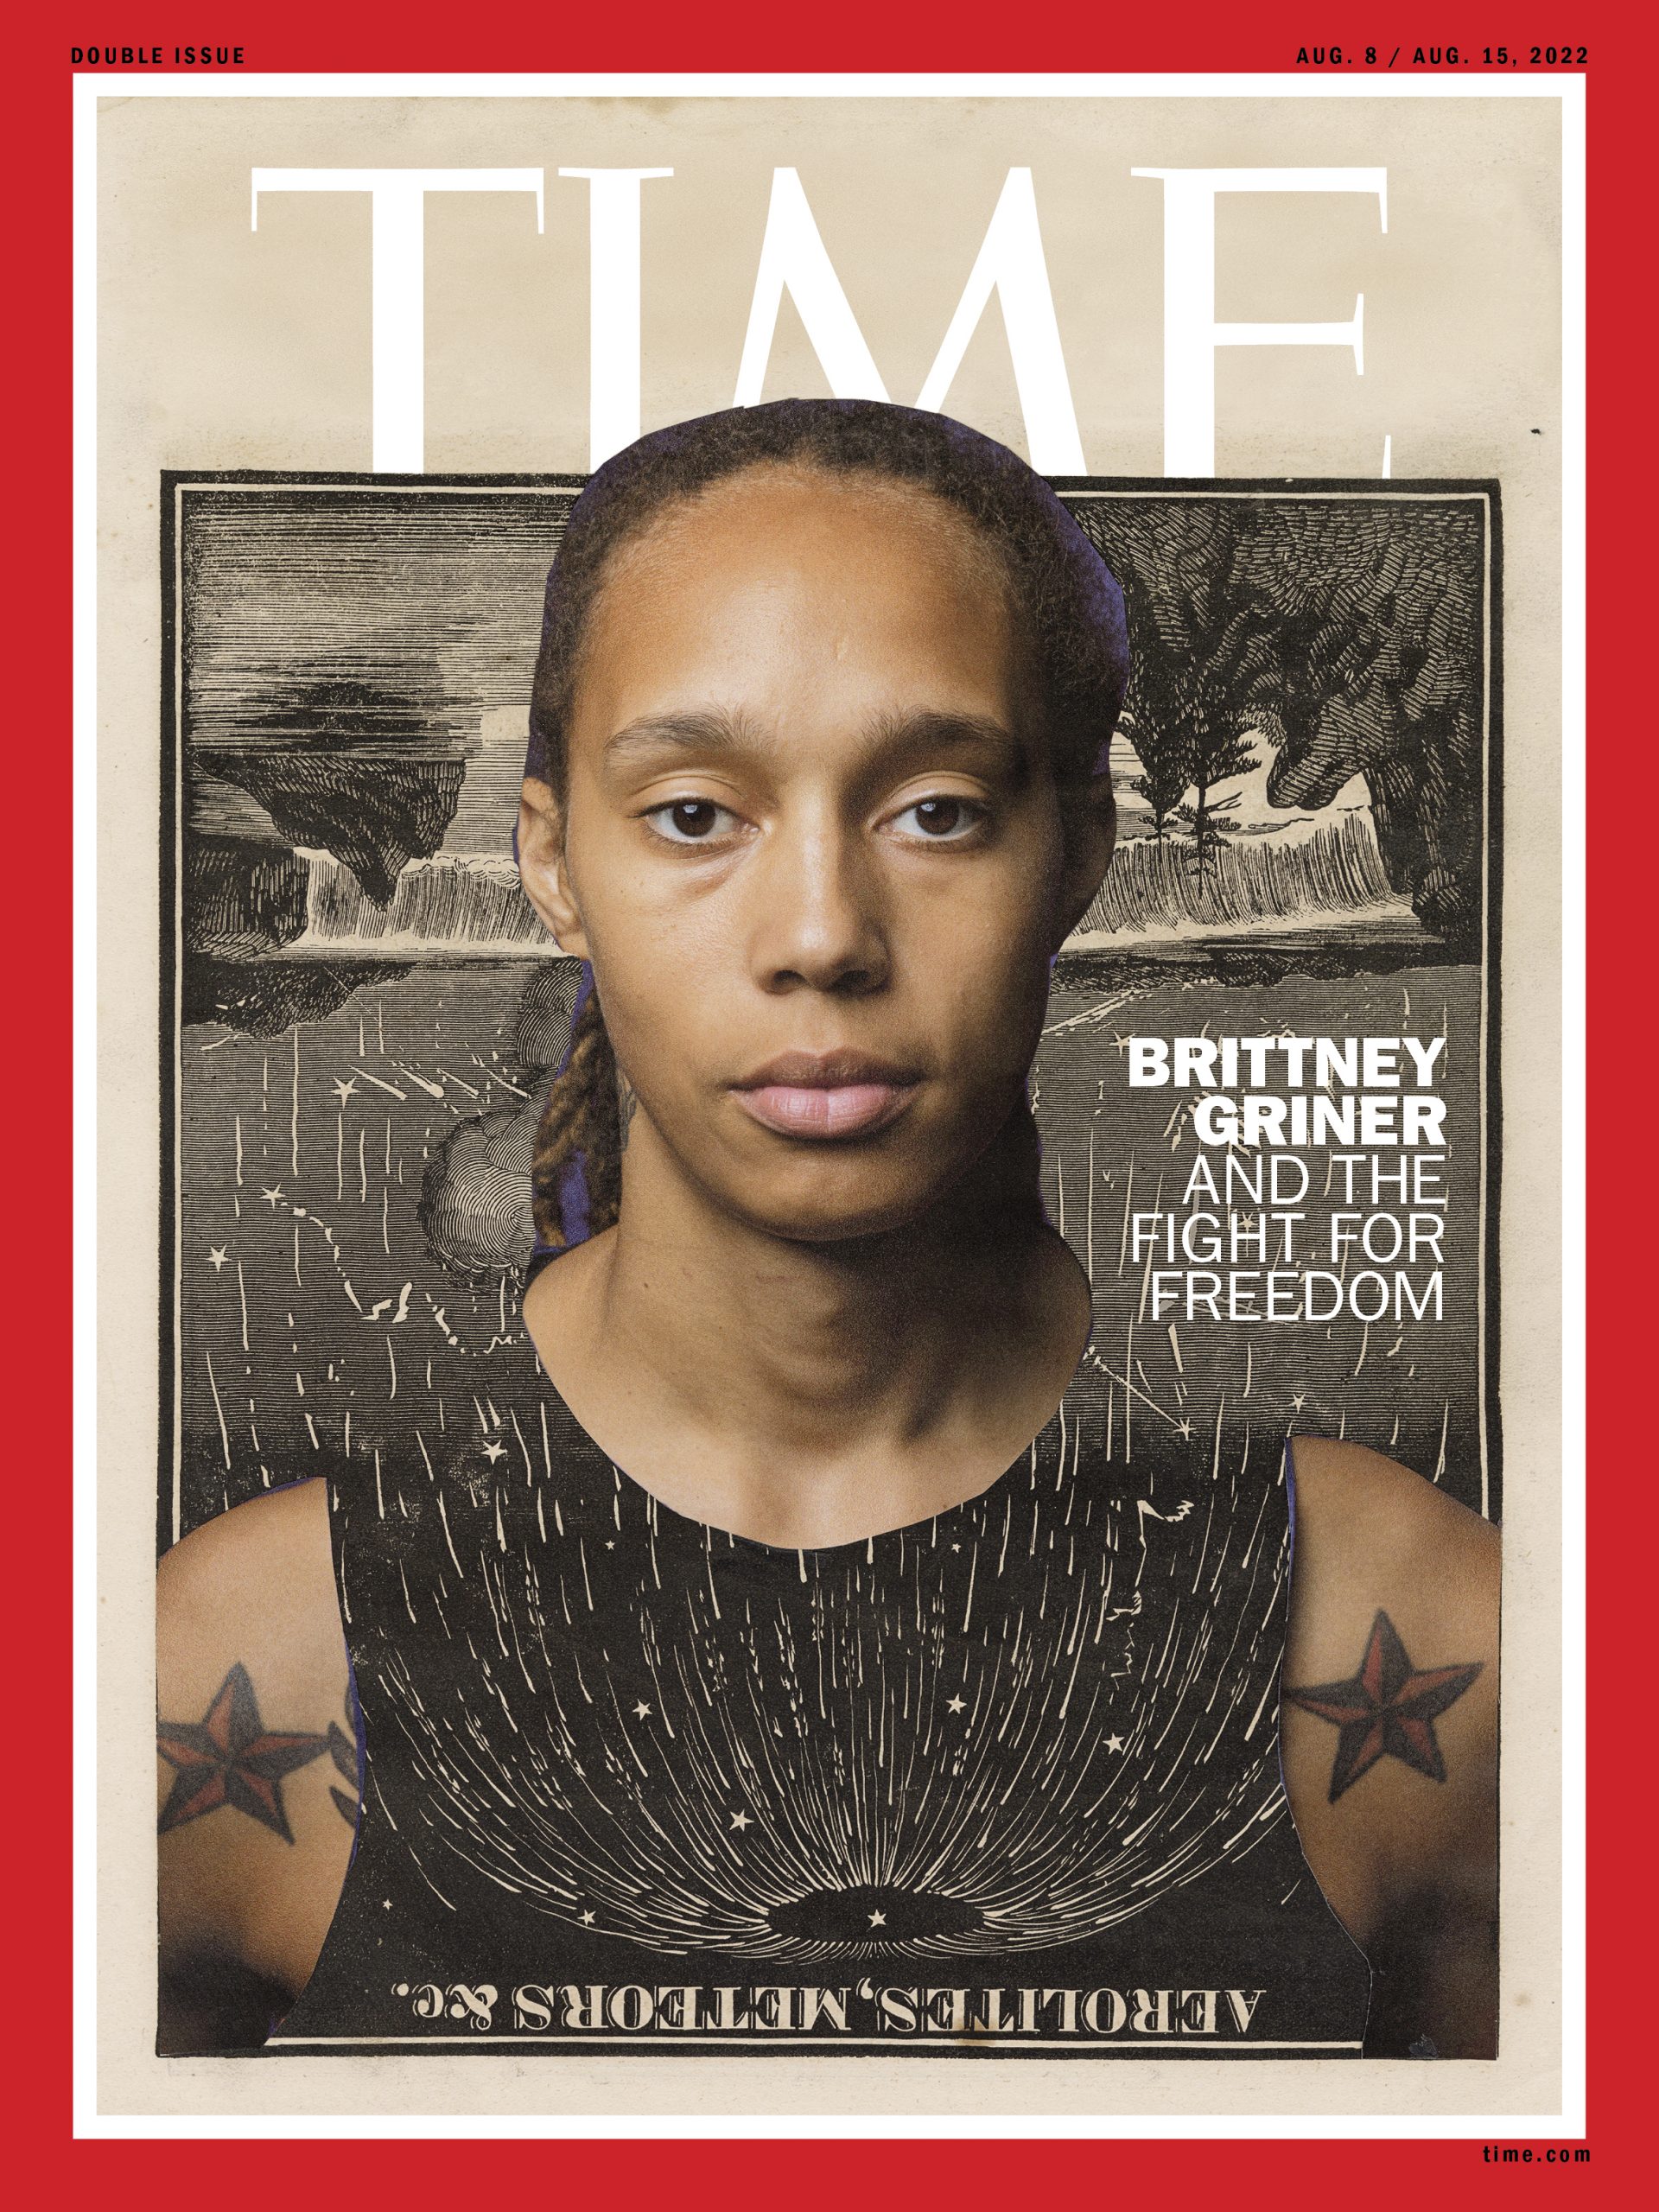 Brittney Griner and Her Fight for Freedom Cover TIME Magazine 